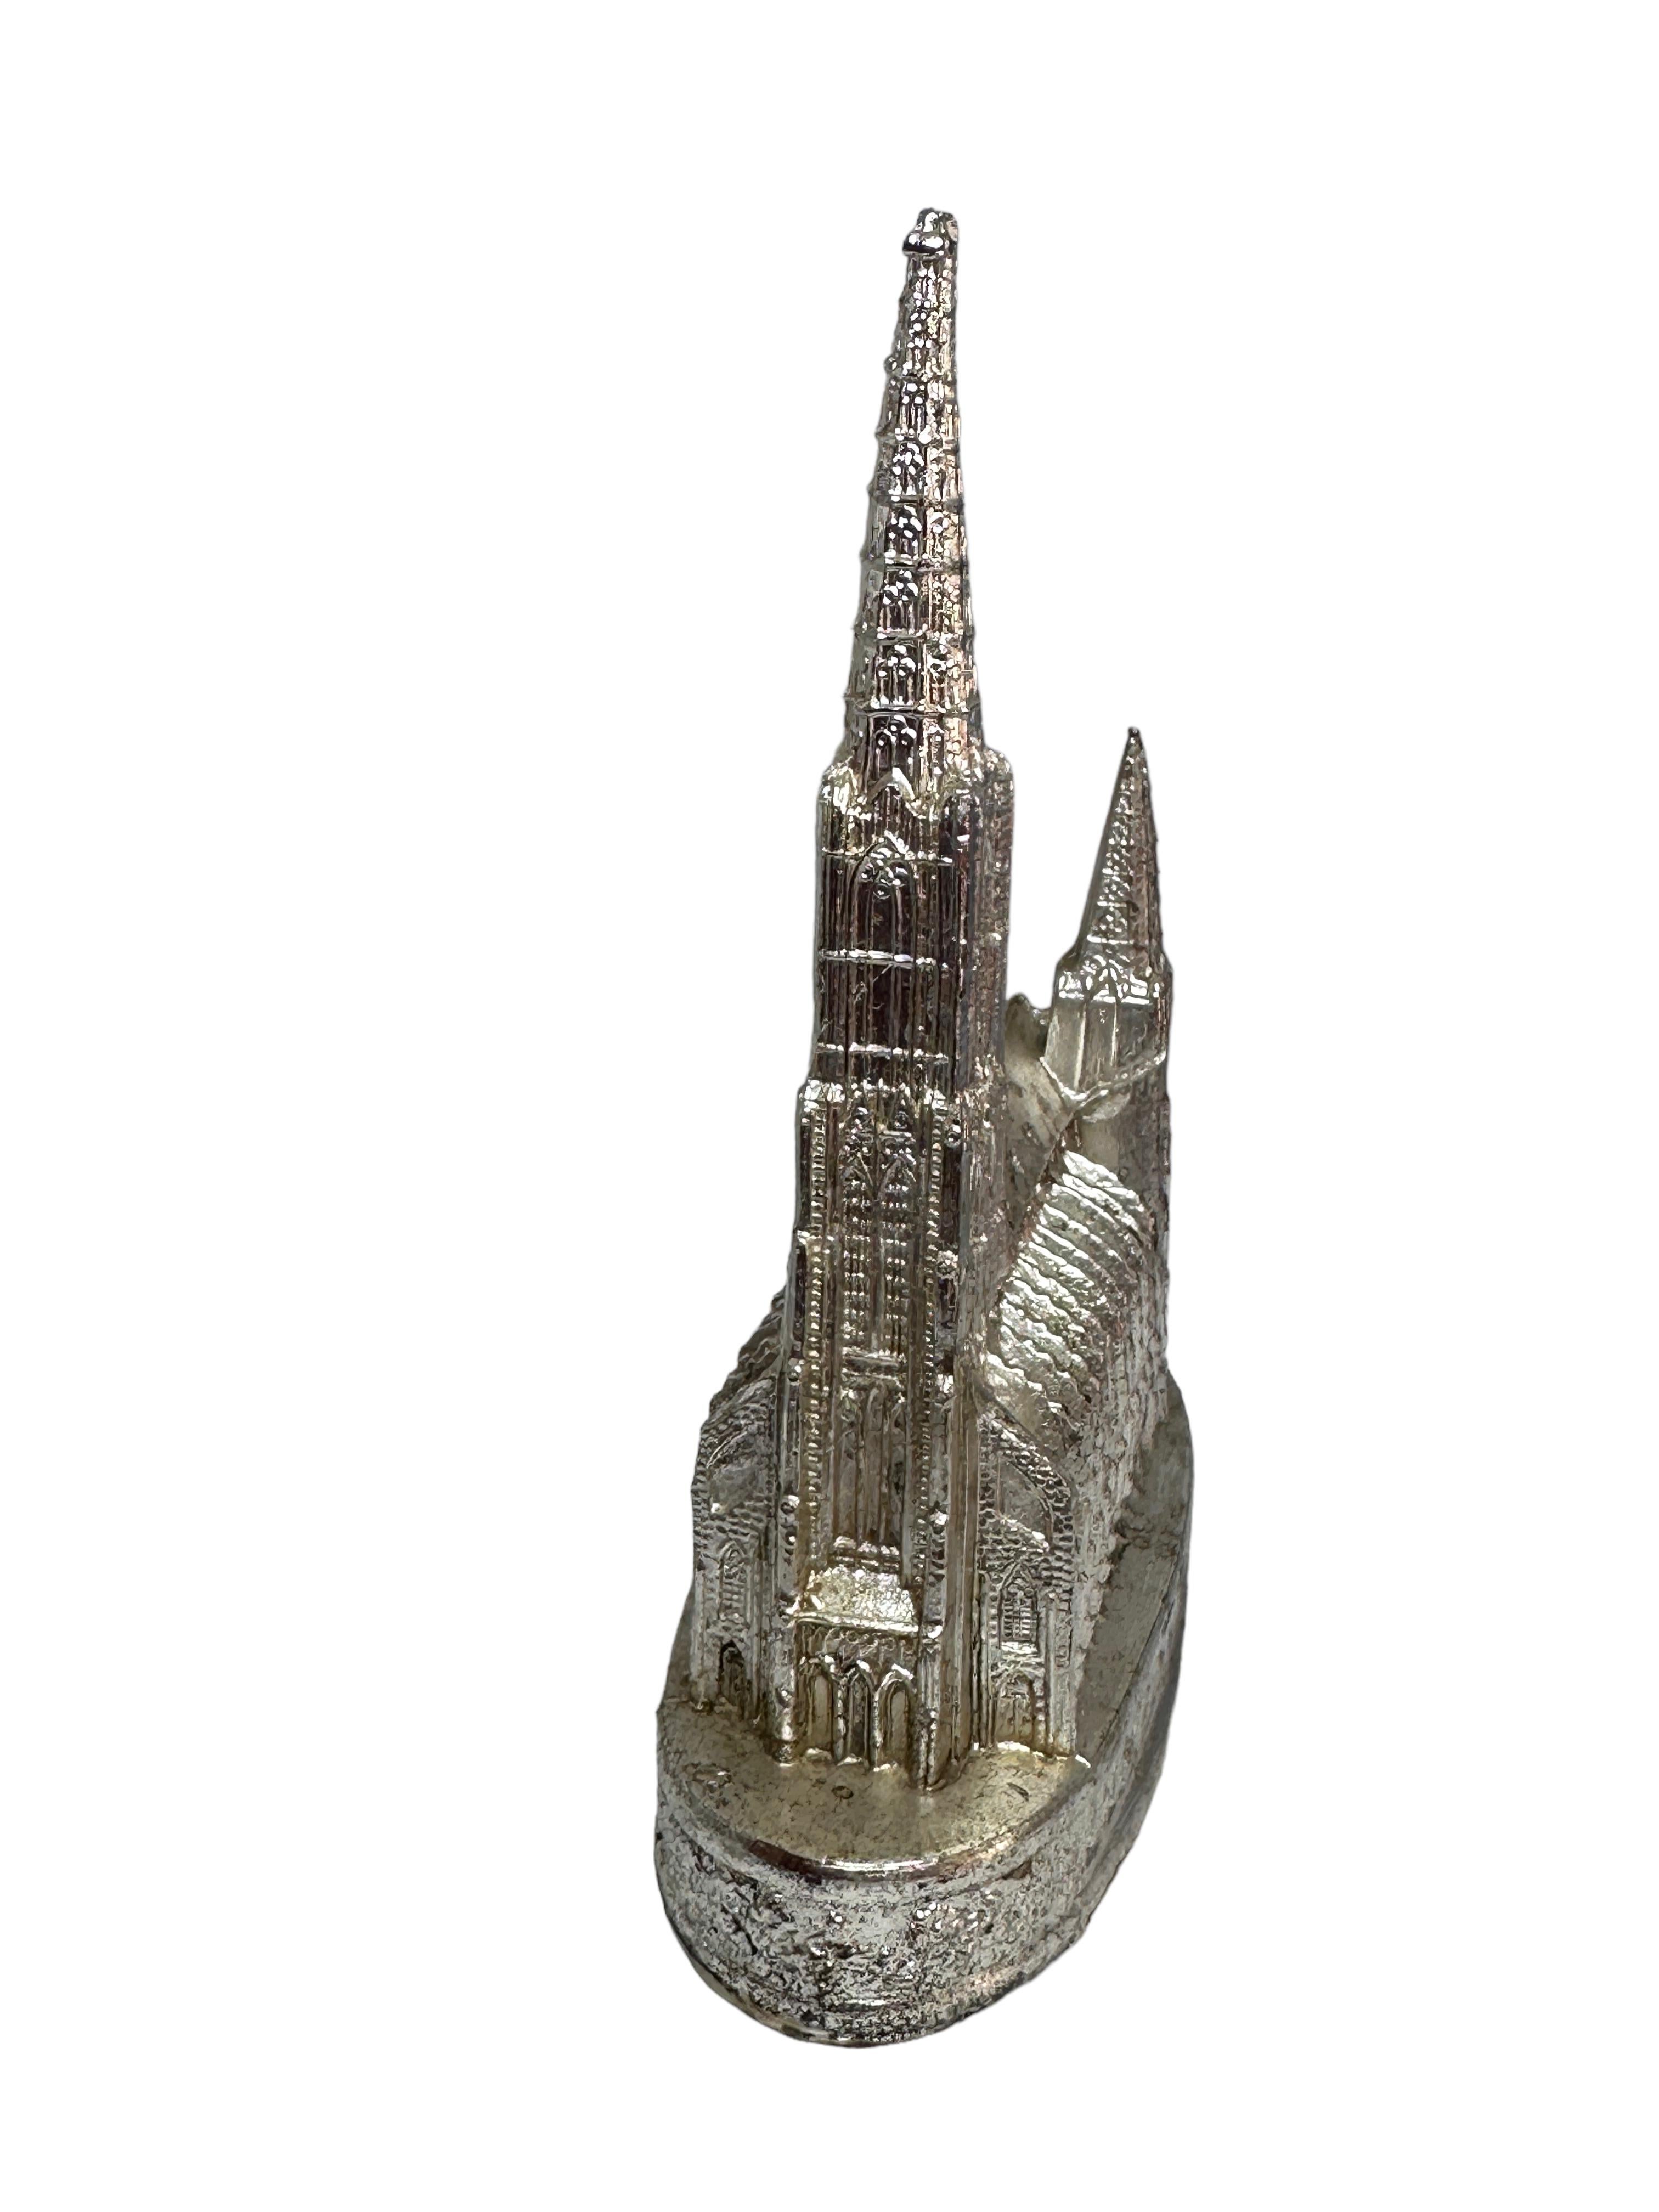 A 1950s souvenir building architectural model. Some wear with a nice patina, but this is old-age. Made of metal. A beautiful nice desktop item or just a display item in your collections of souvenirs from around the world.

